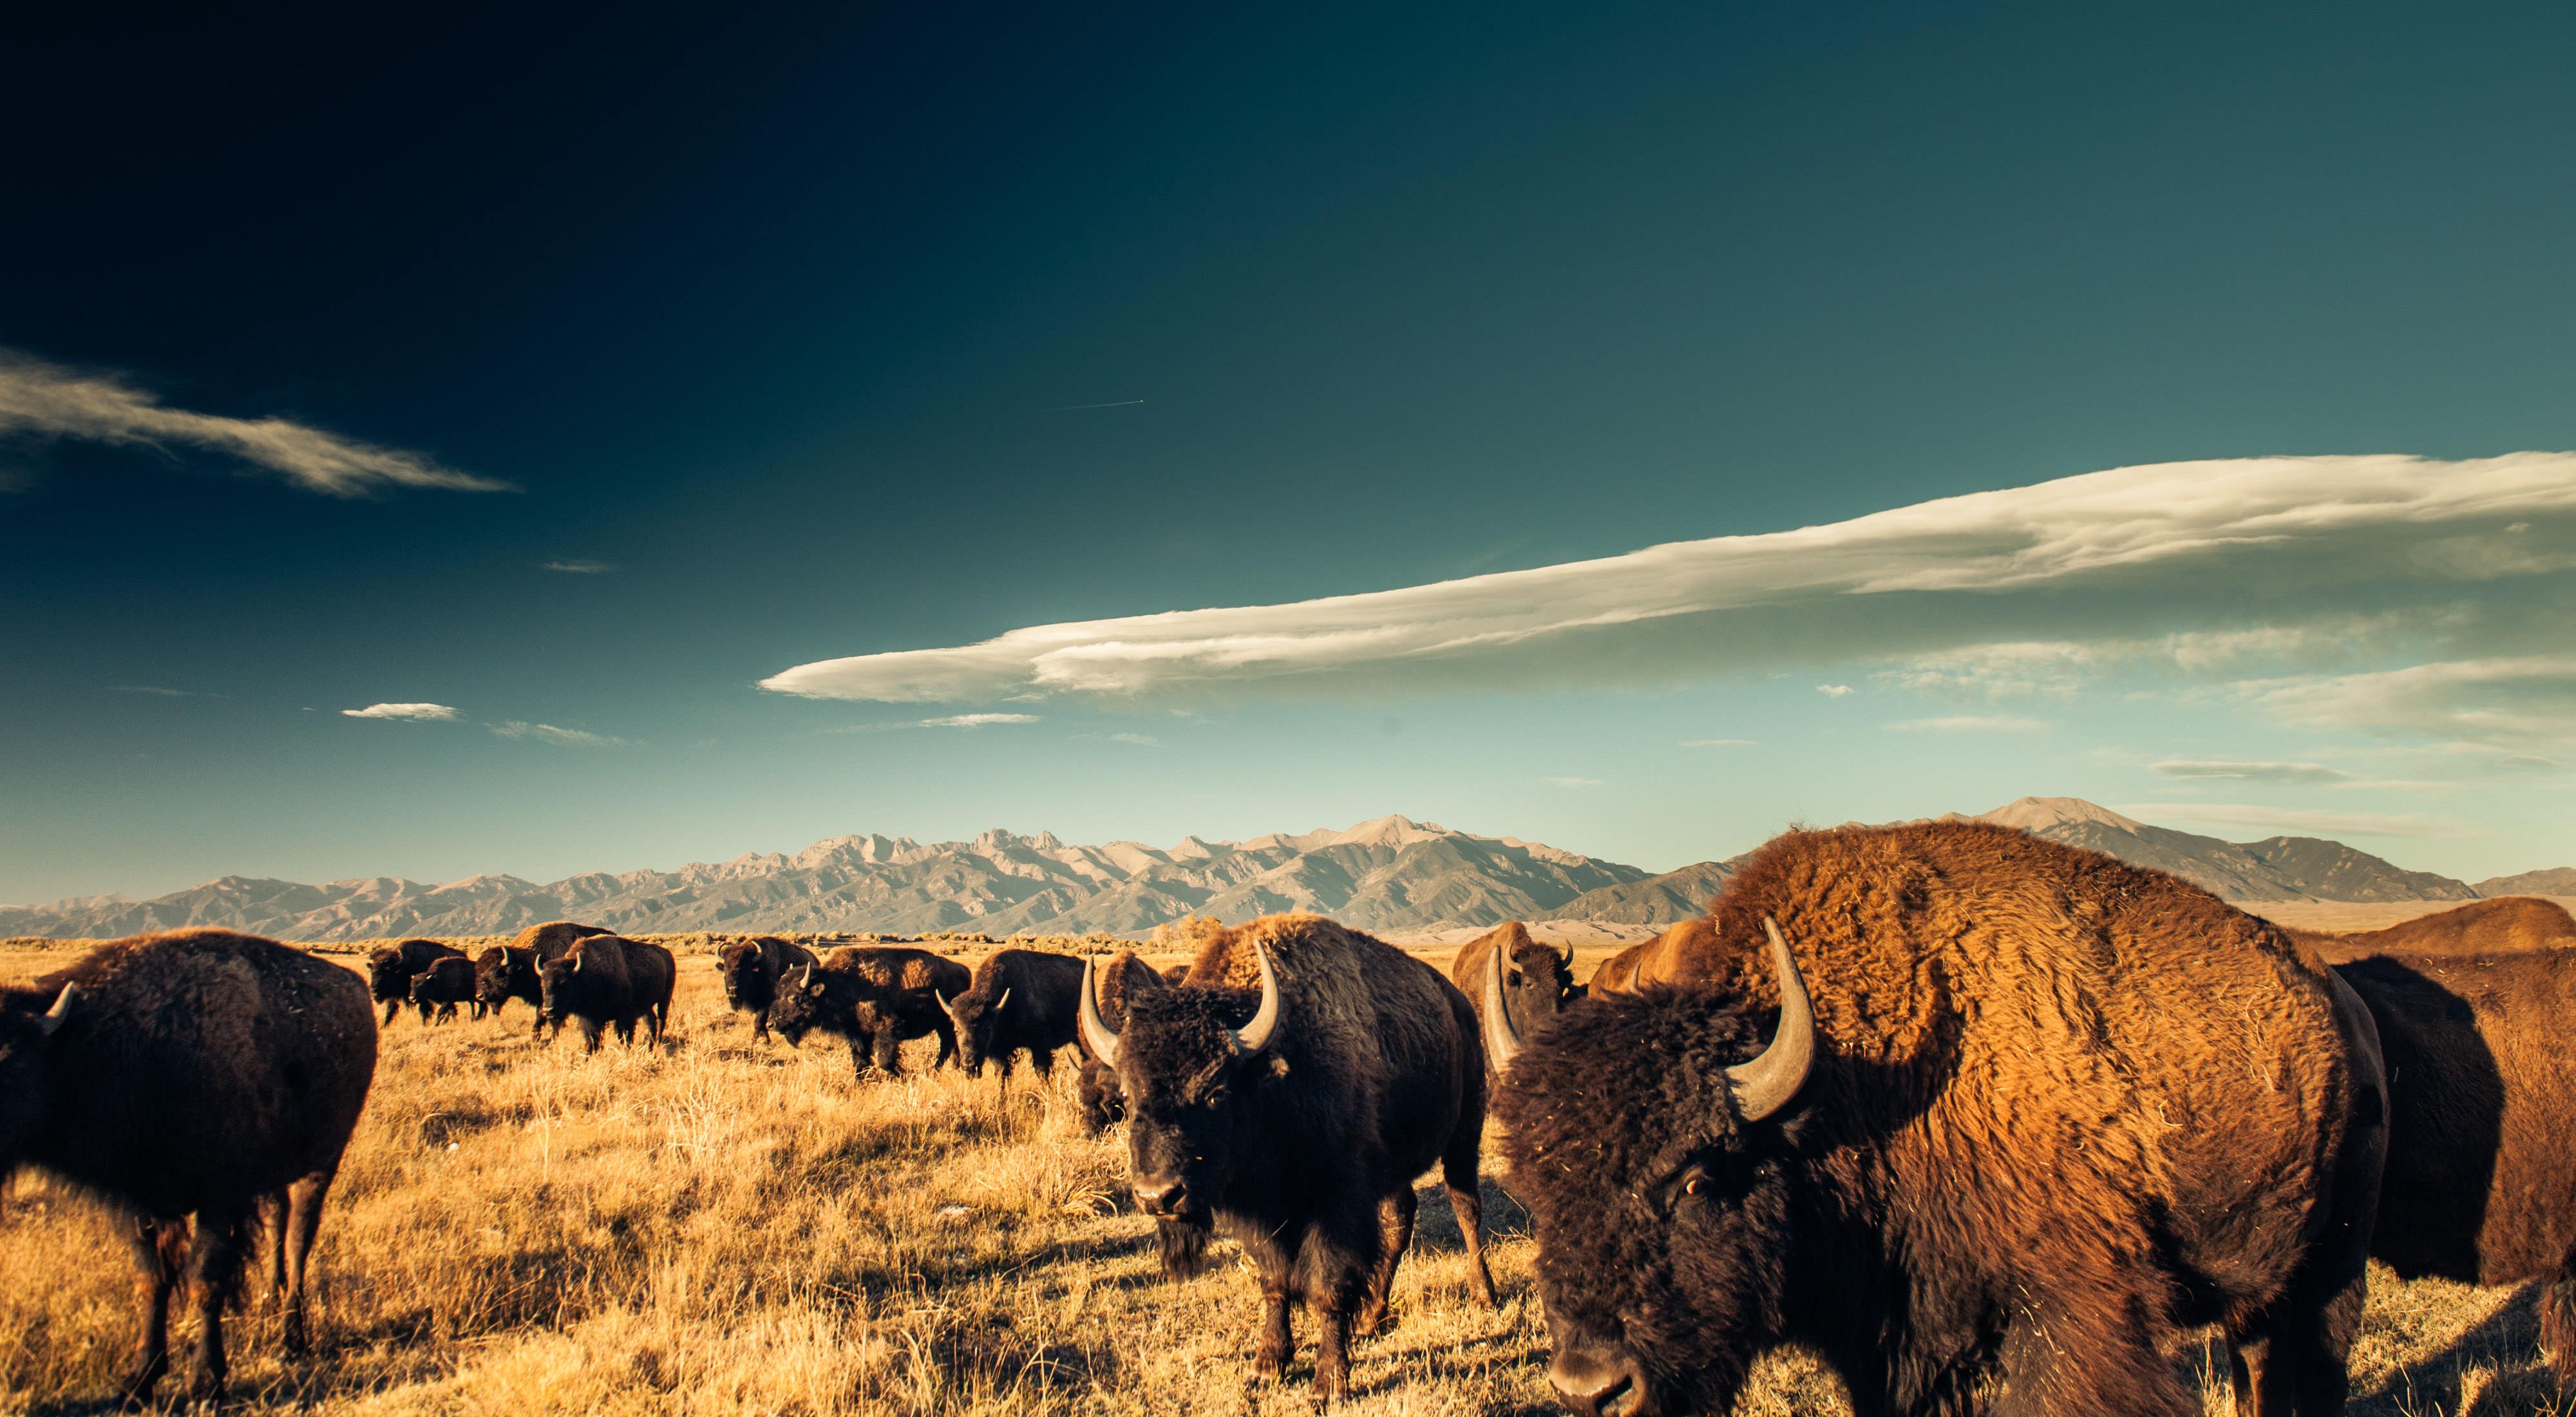 (ALL INTERNAL RIGHTS, LIMITED EXTERNAL RIGHTS) Bison (Bison bison) grazing on the Zapata Ranch with the Great Sand Dunes NP and Sangre de Cristo mountains in the background, Colorado USA. PHOTO CREDIT: © Nick Hall